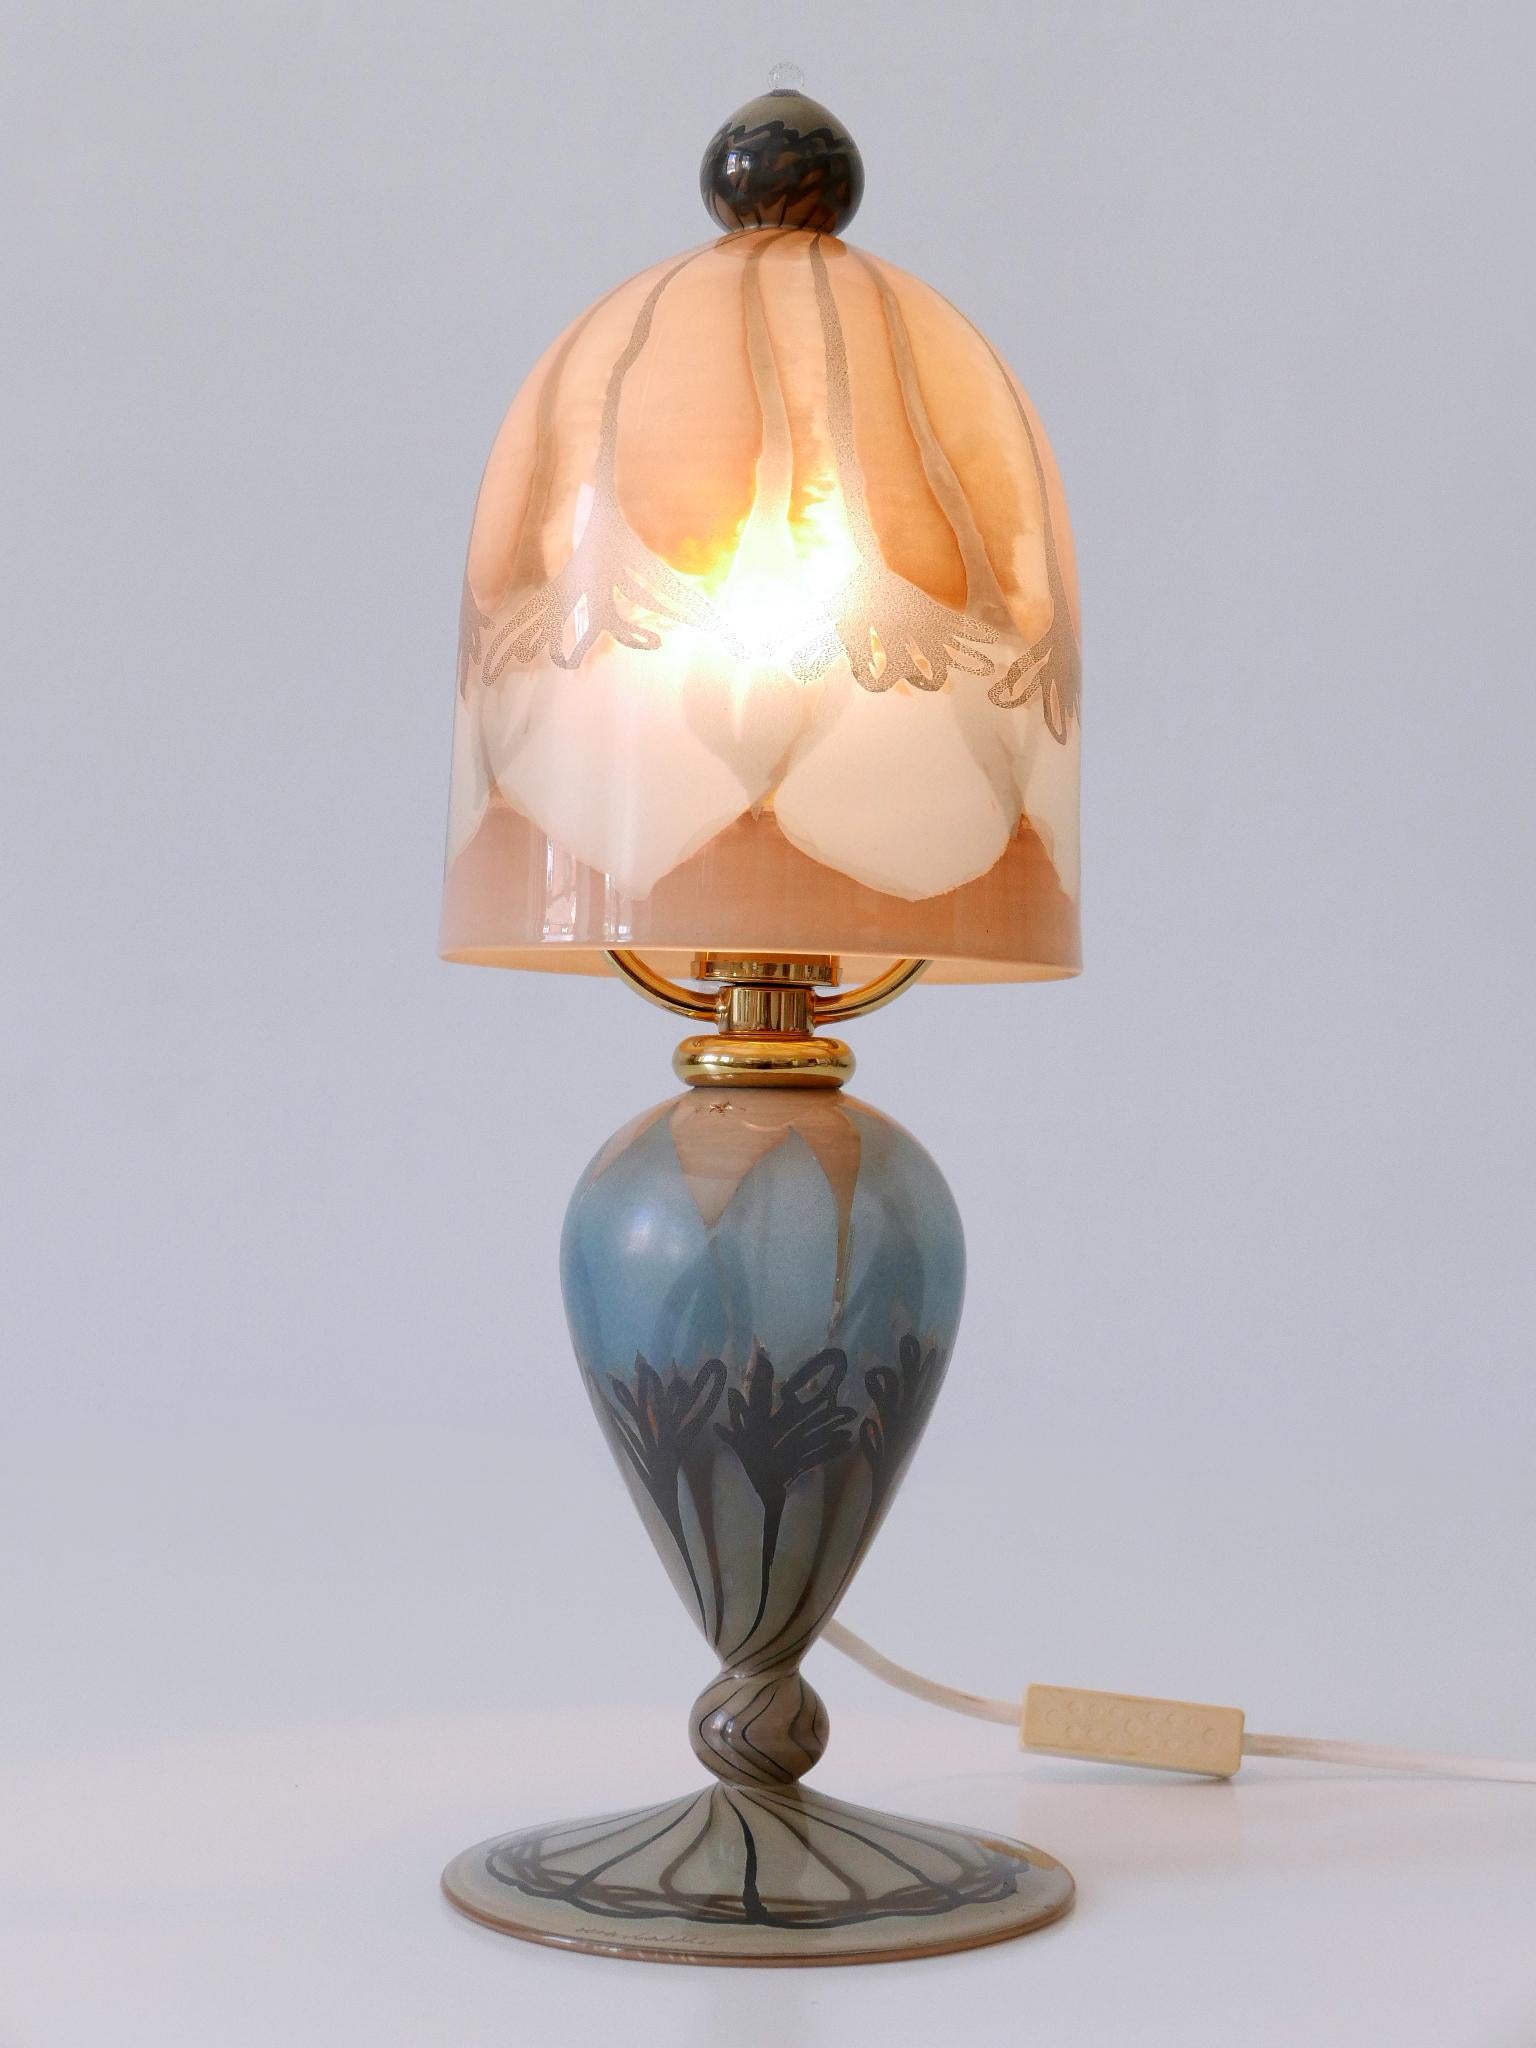 Elegant and highly decorative vintage table lamp or bedside table lamp. Designed & manufactured in Germany, 1980s. Signed on the base: Vera Walther

Executed in colored art glass and polished brass, the table lamp is executed with 1 x E14 / E12